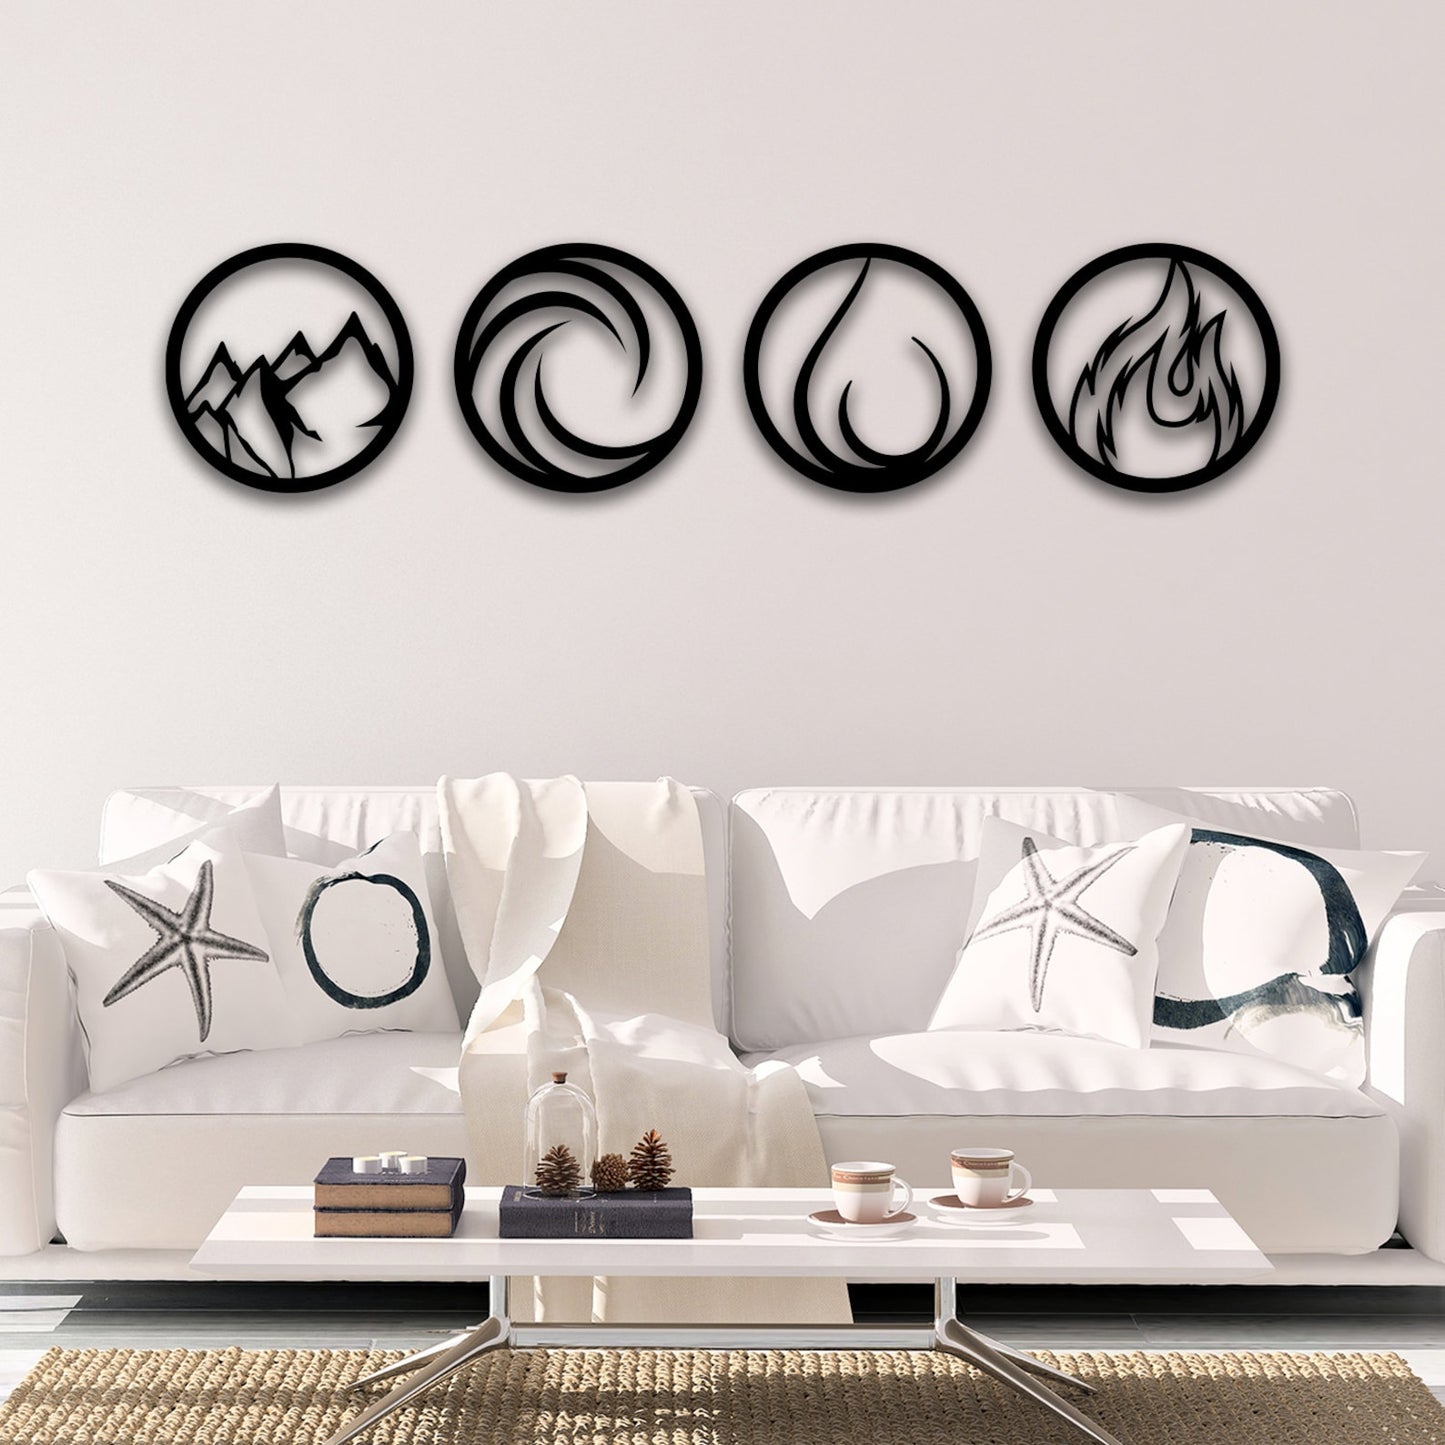 4 Elements Wall Art  Decor - Earth, Fire, Water & Air : Style - 4